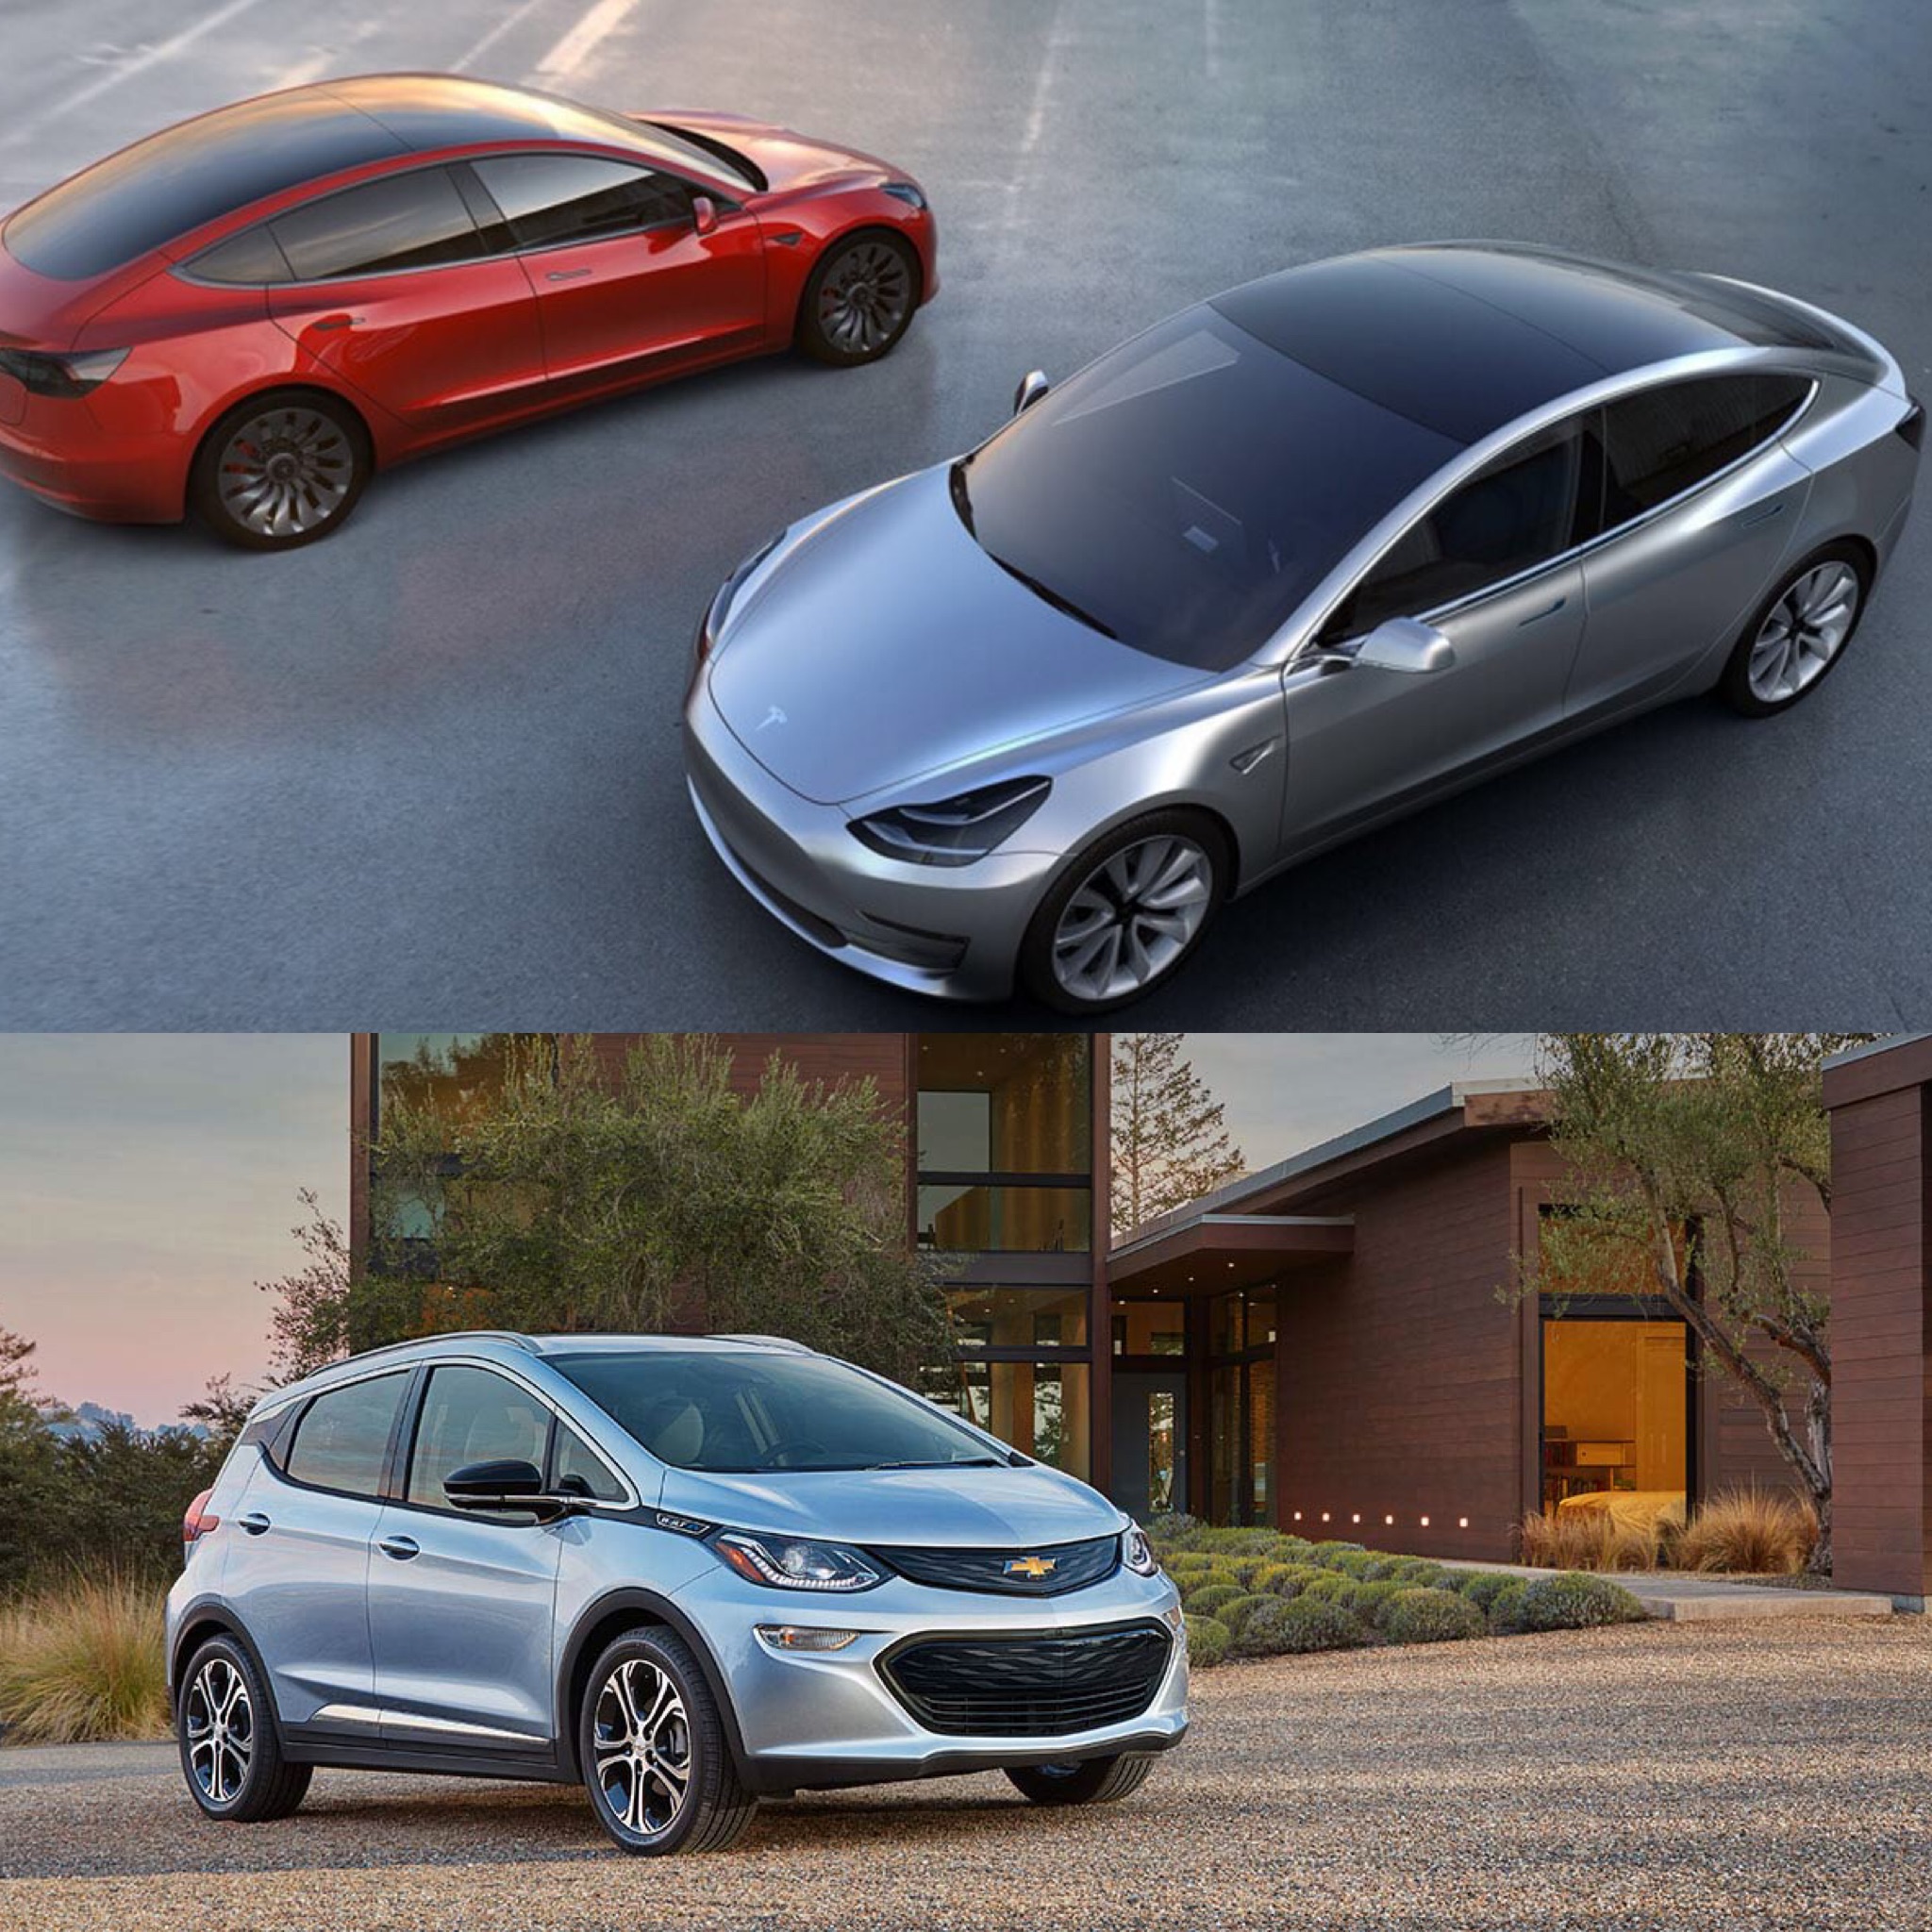 Tesla Model 3 and Chevy Bolt